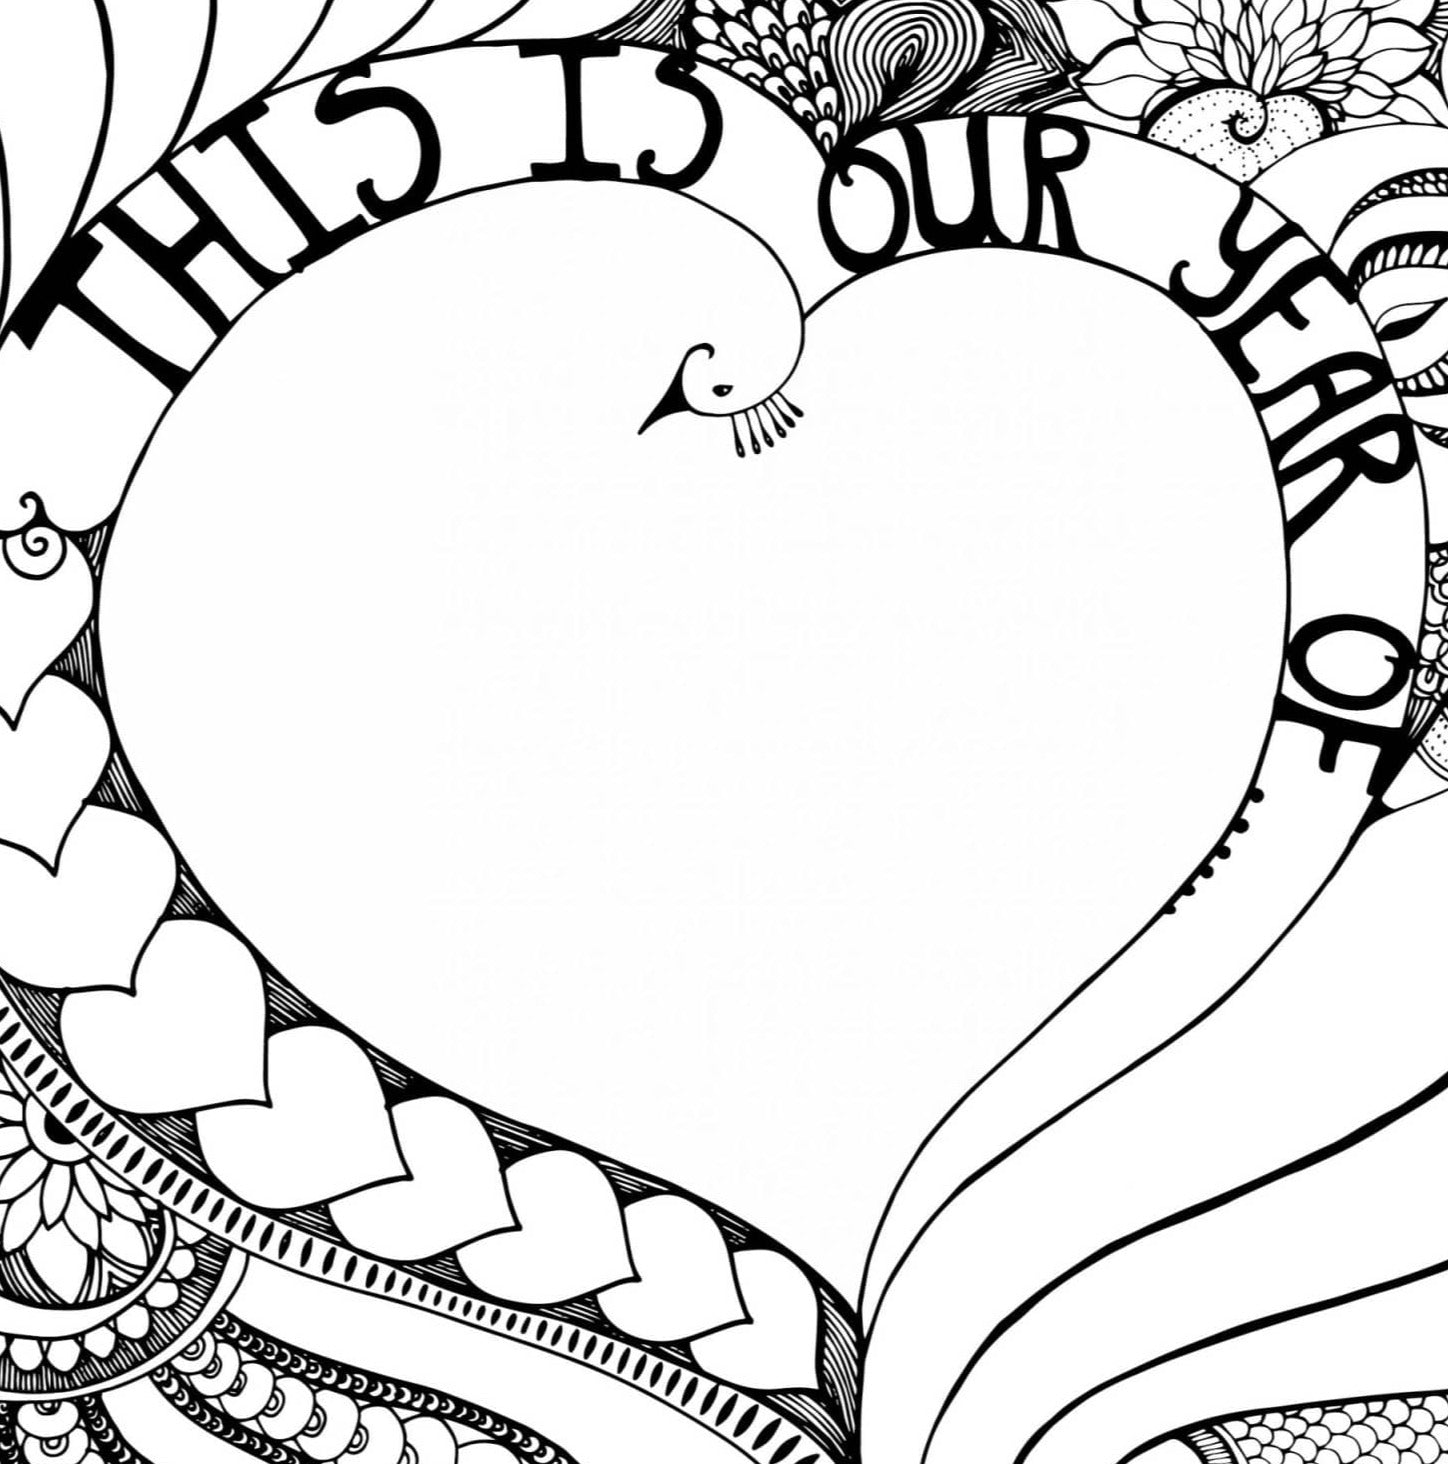 this is our year - heart coloring page